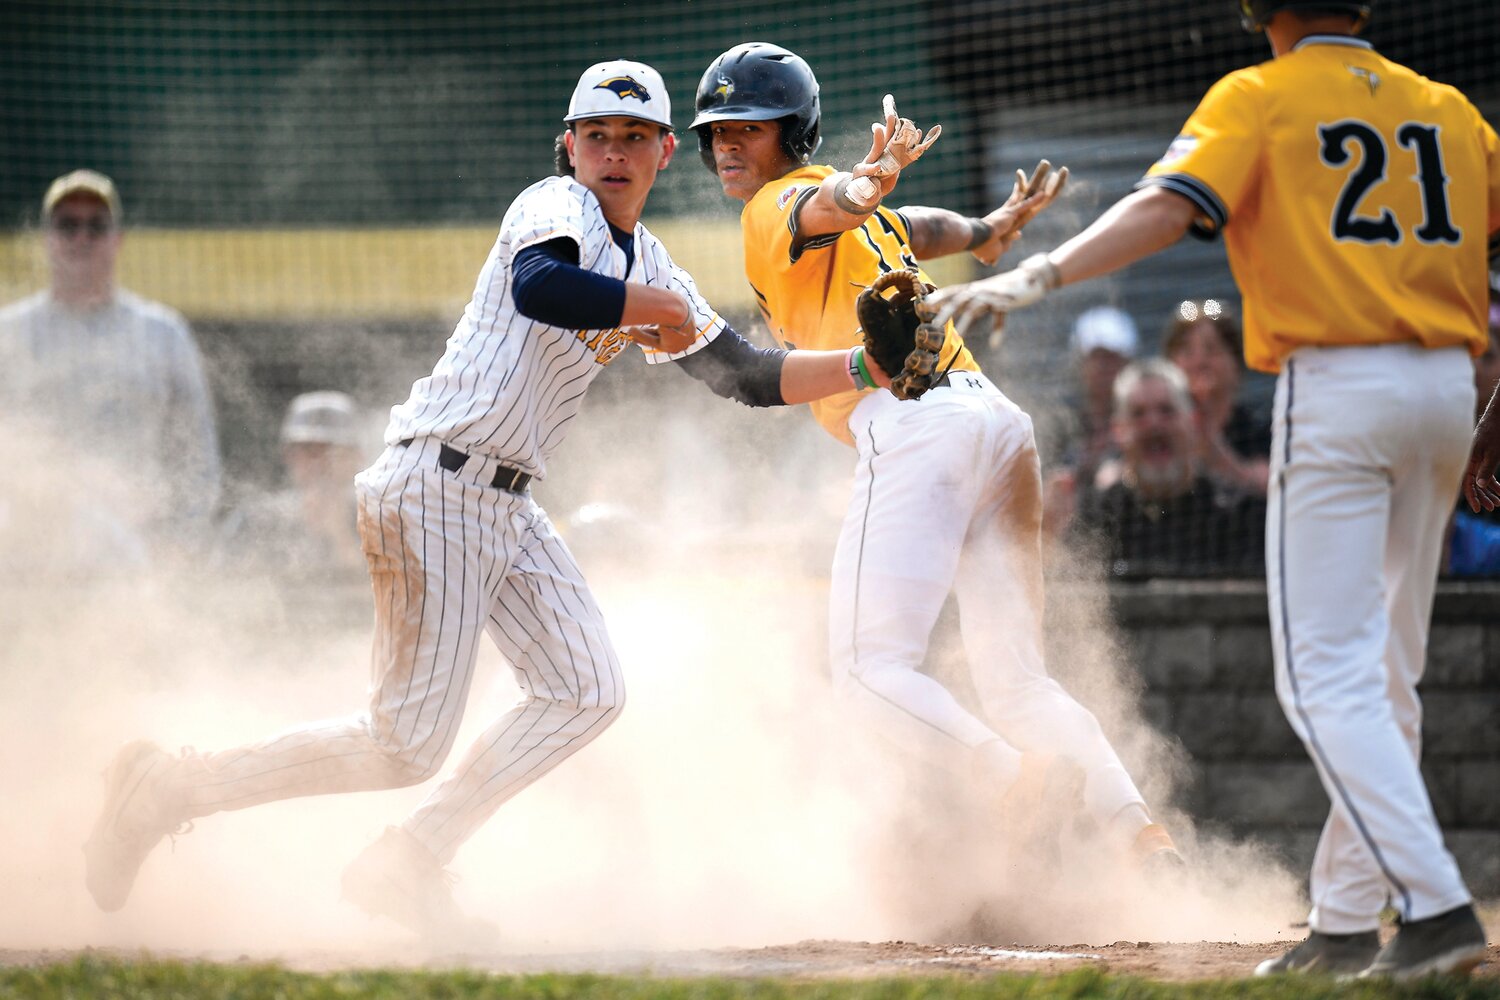 Archbishop Wood’s Dariel Tiburcio signals safe after stealing home on a wild pitch during the nine-run first inning.